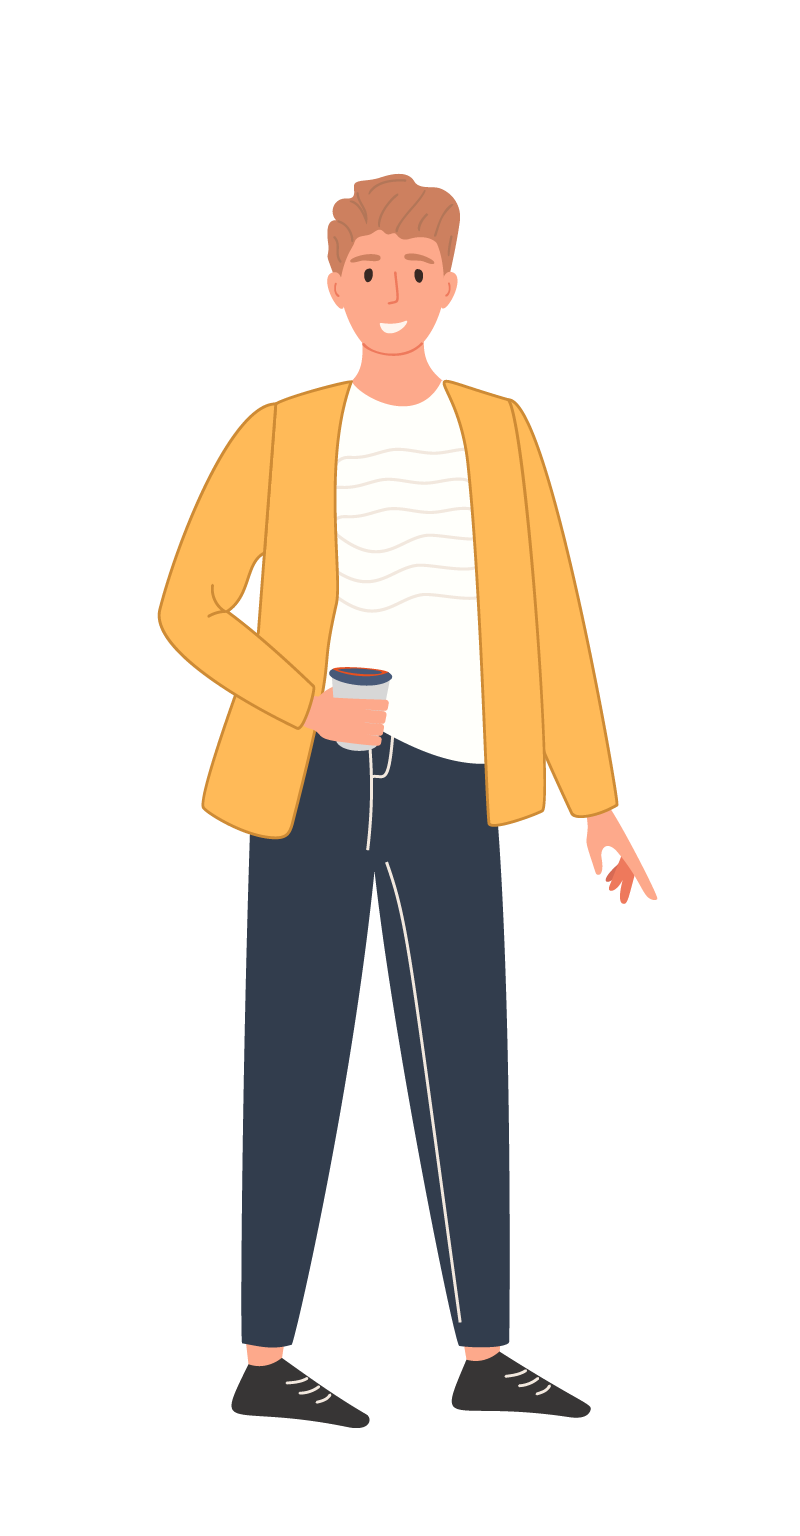 coffee break young man with casual attire illustration